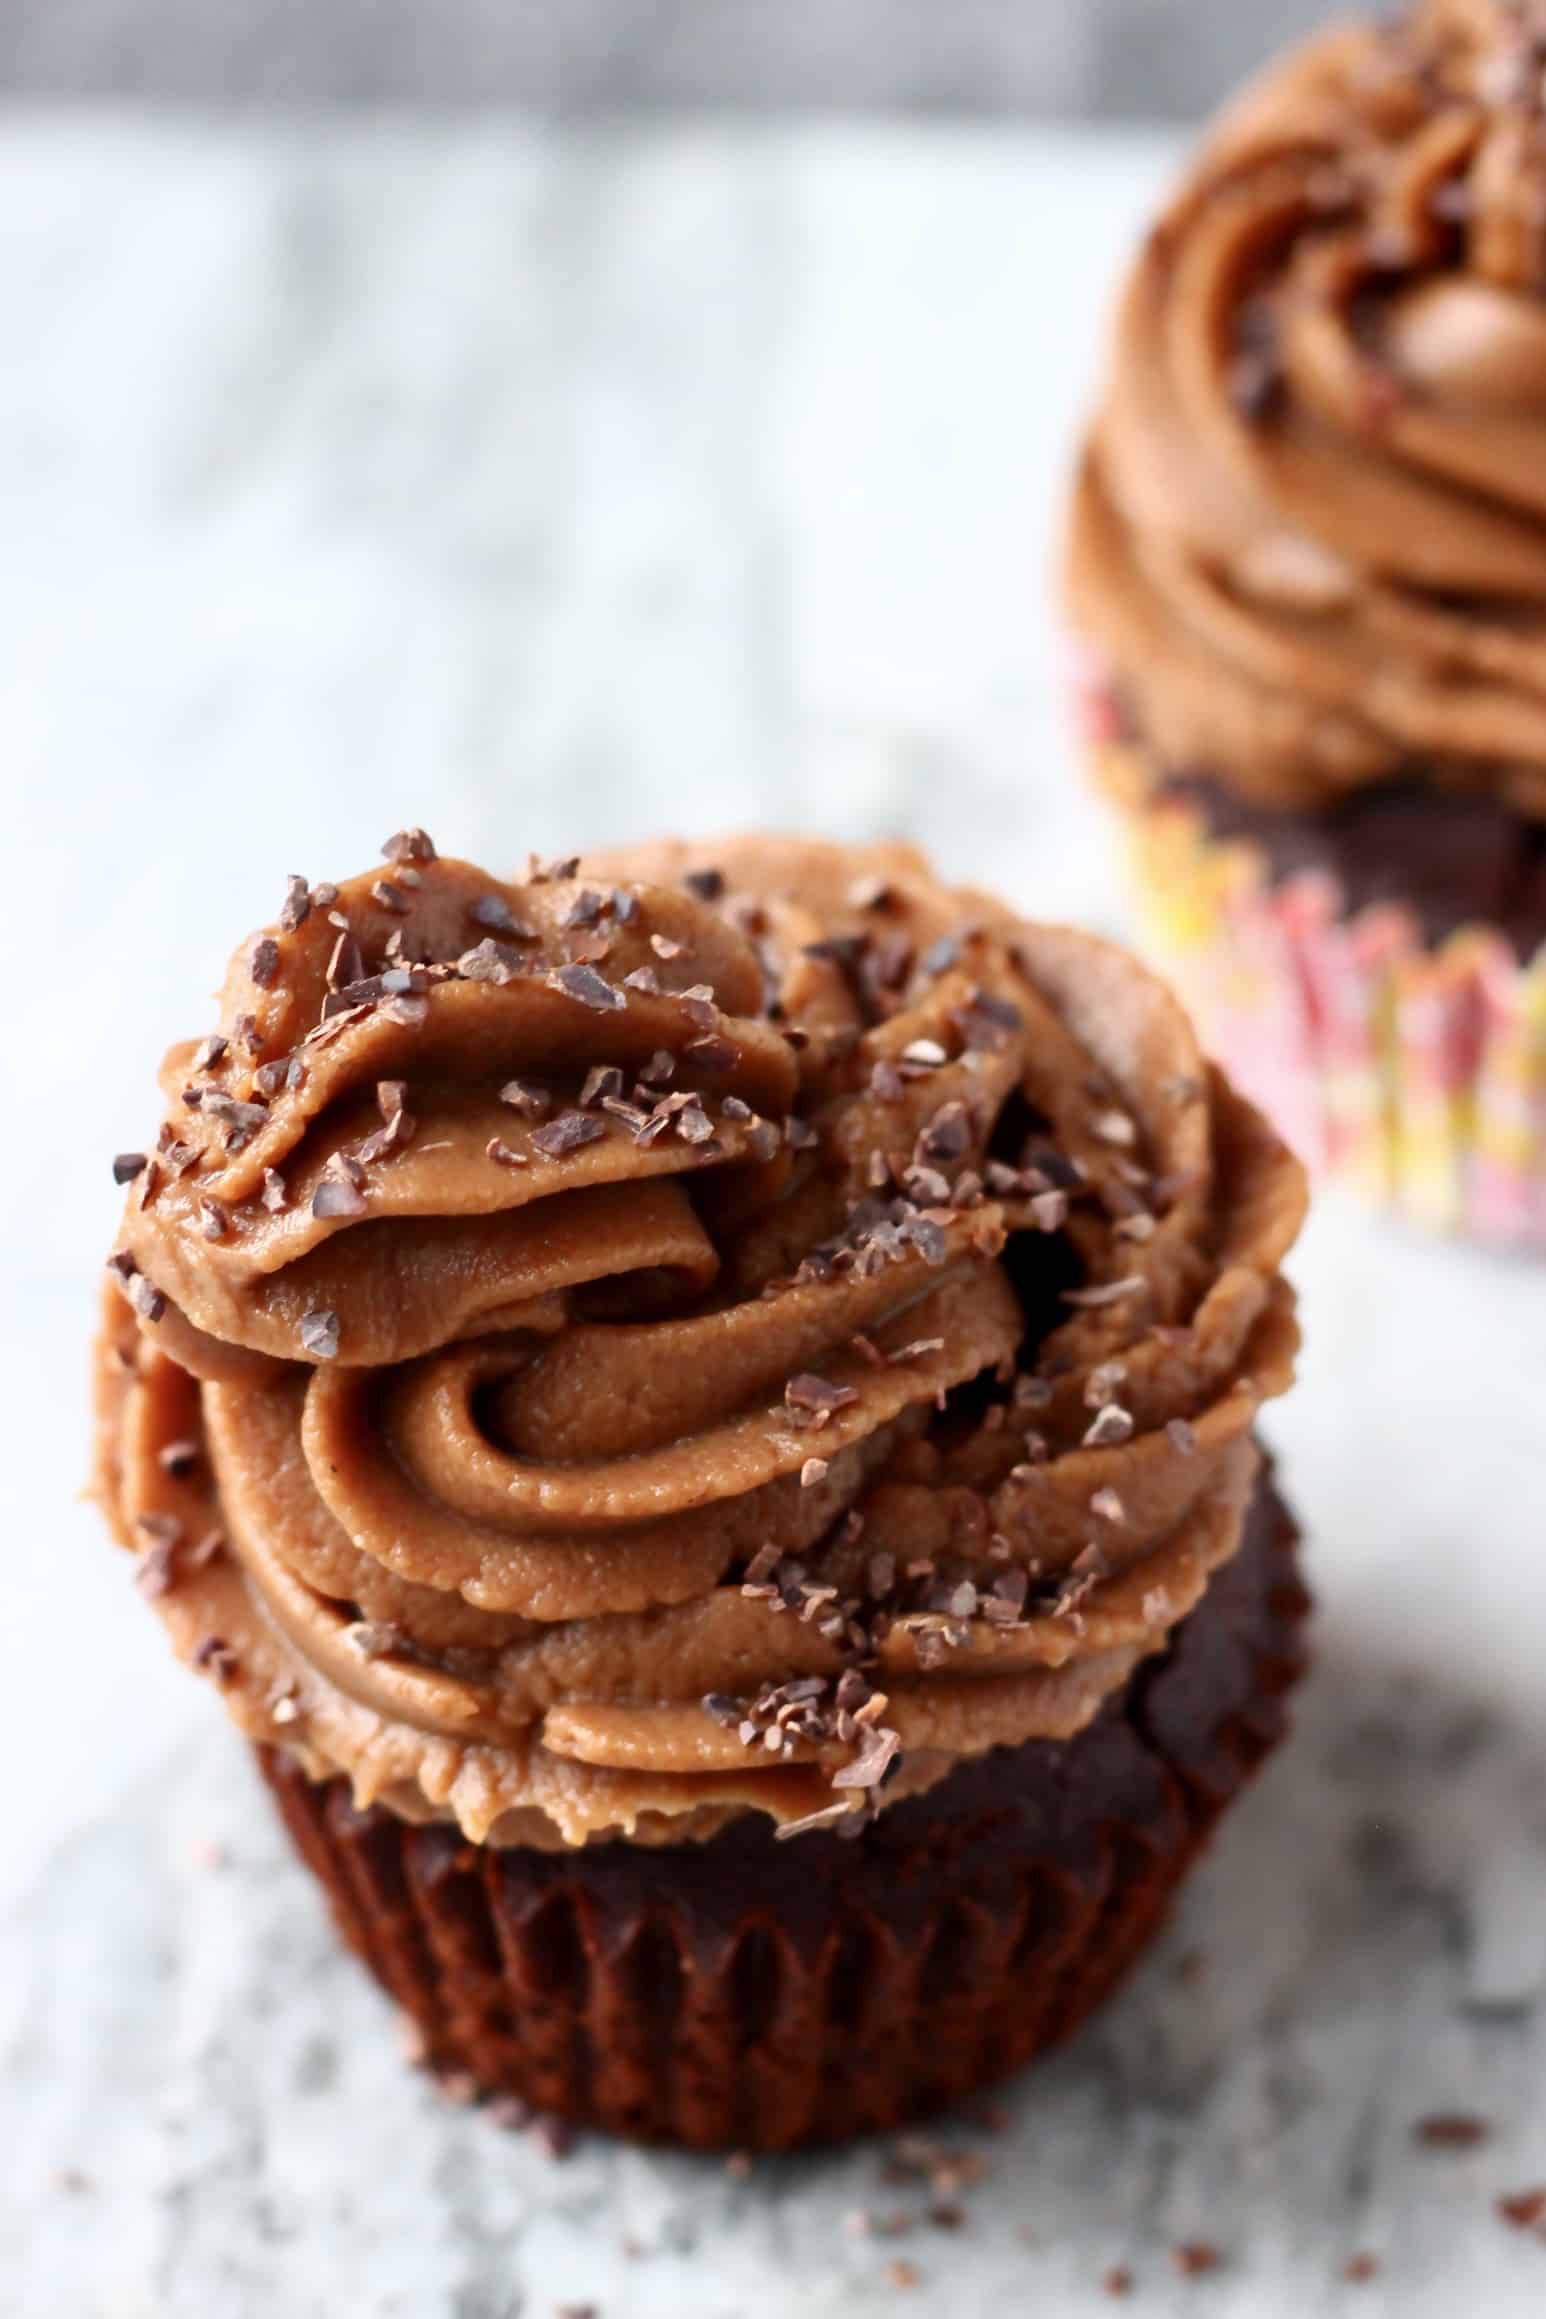 Two gluten-free vegan chocolate cupcakes with chocolate frosting piped on top